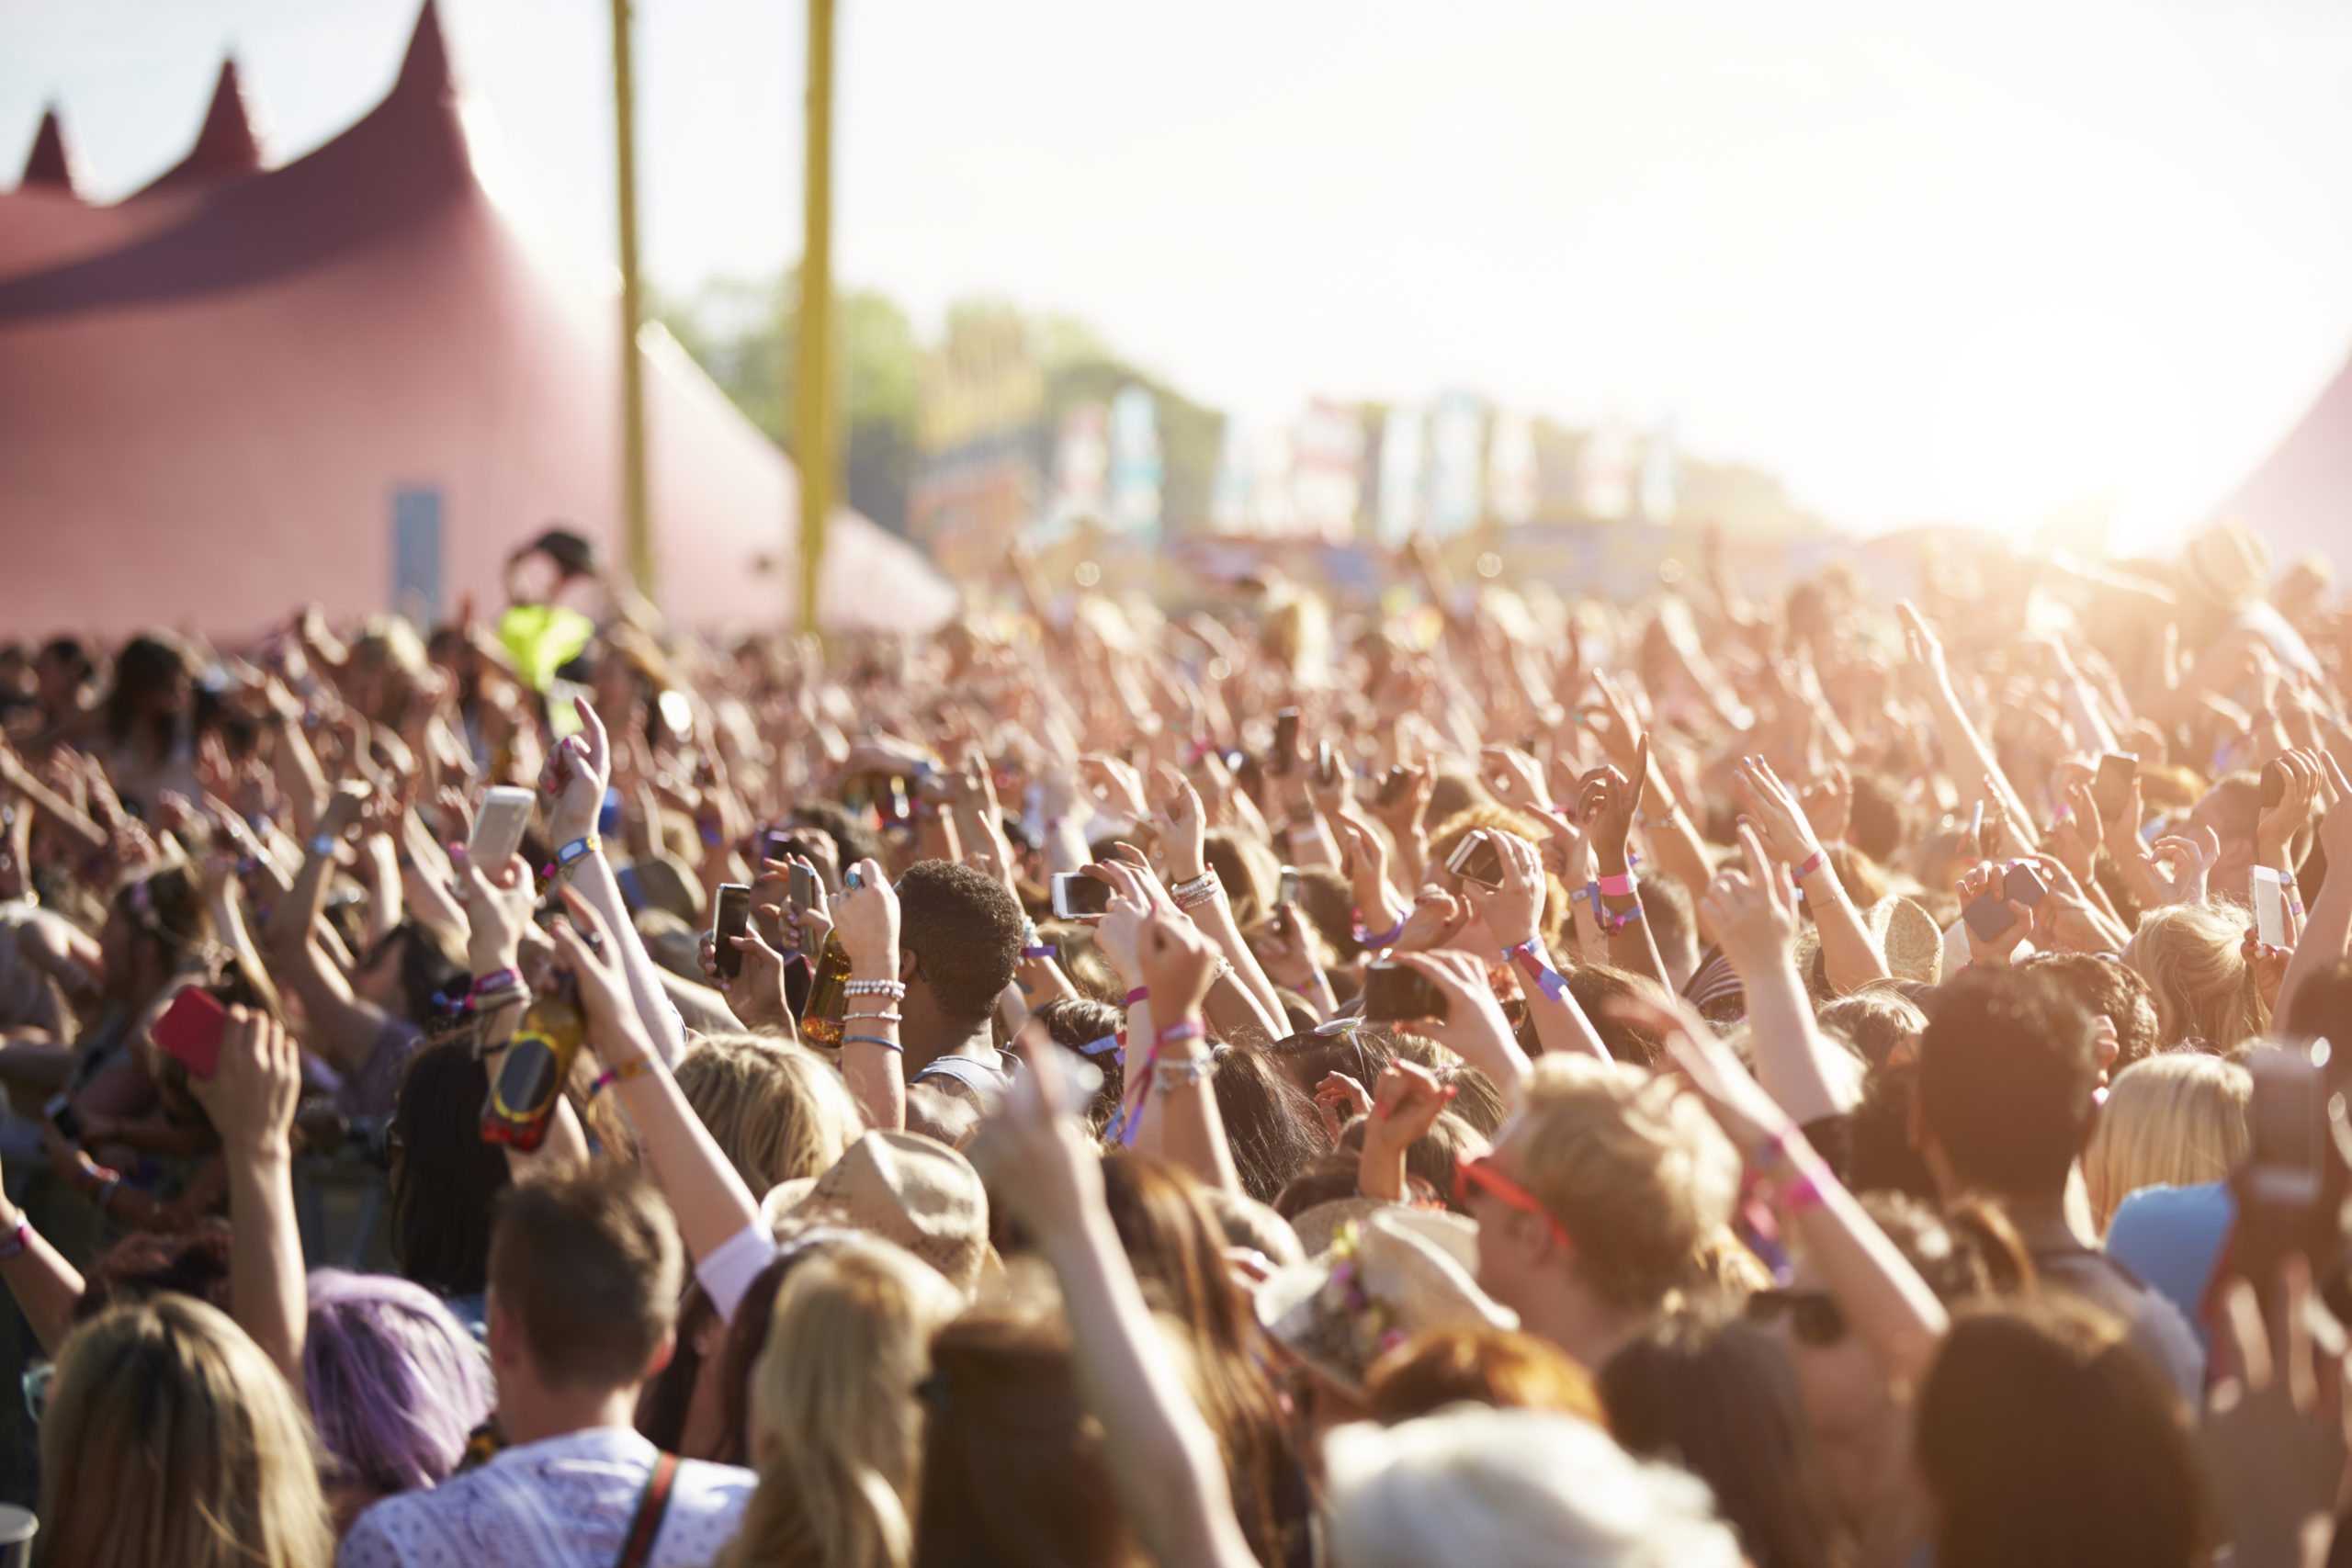 What to Pack For a Music Festival